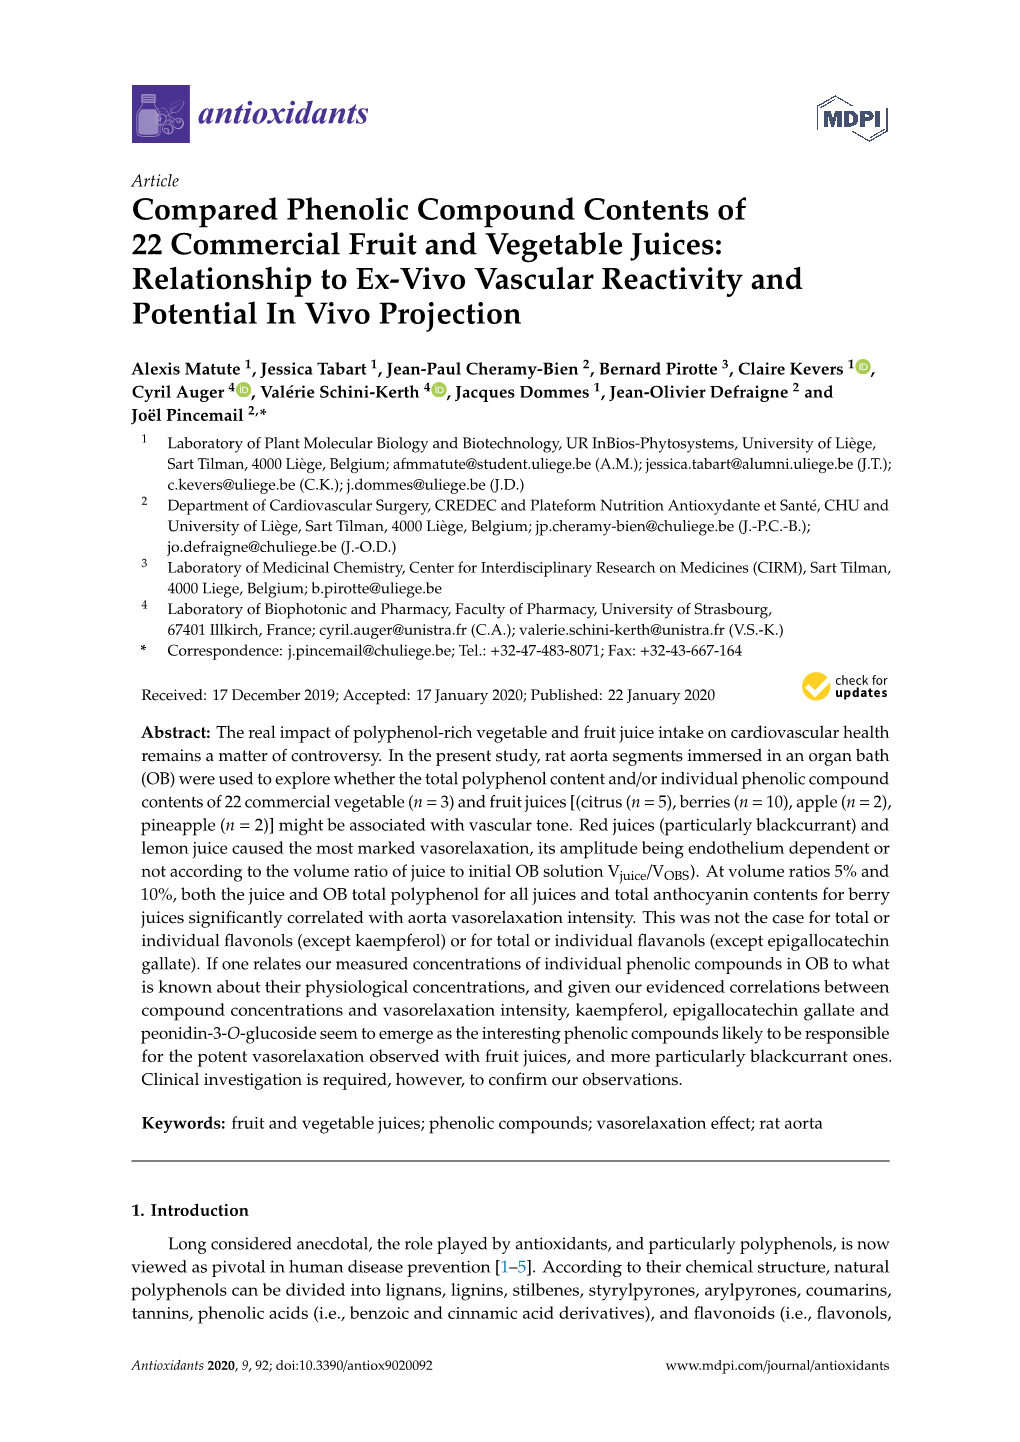 Compared Phenolic Compound Contents of 22 Commercial Fruit and Vegetable Juices: Relationship to Ex-Vivo Vascular Reactivity and Potential in Vivo Projection